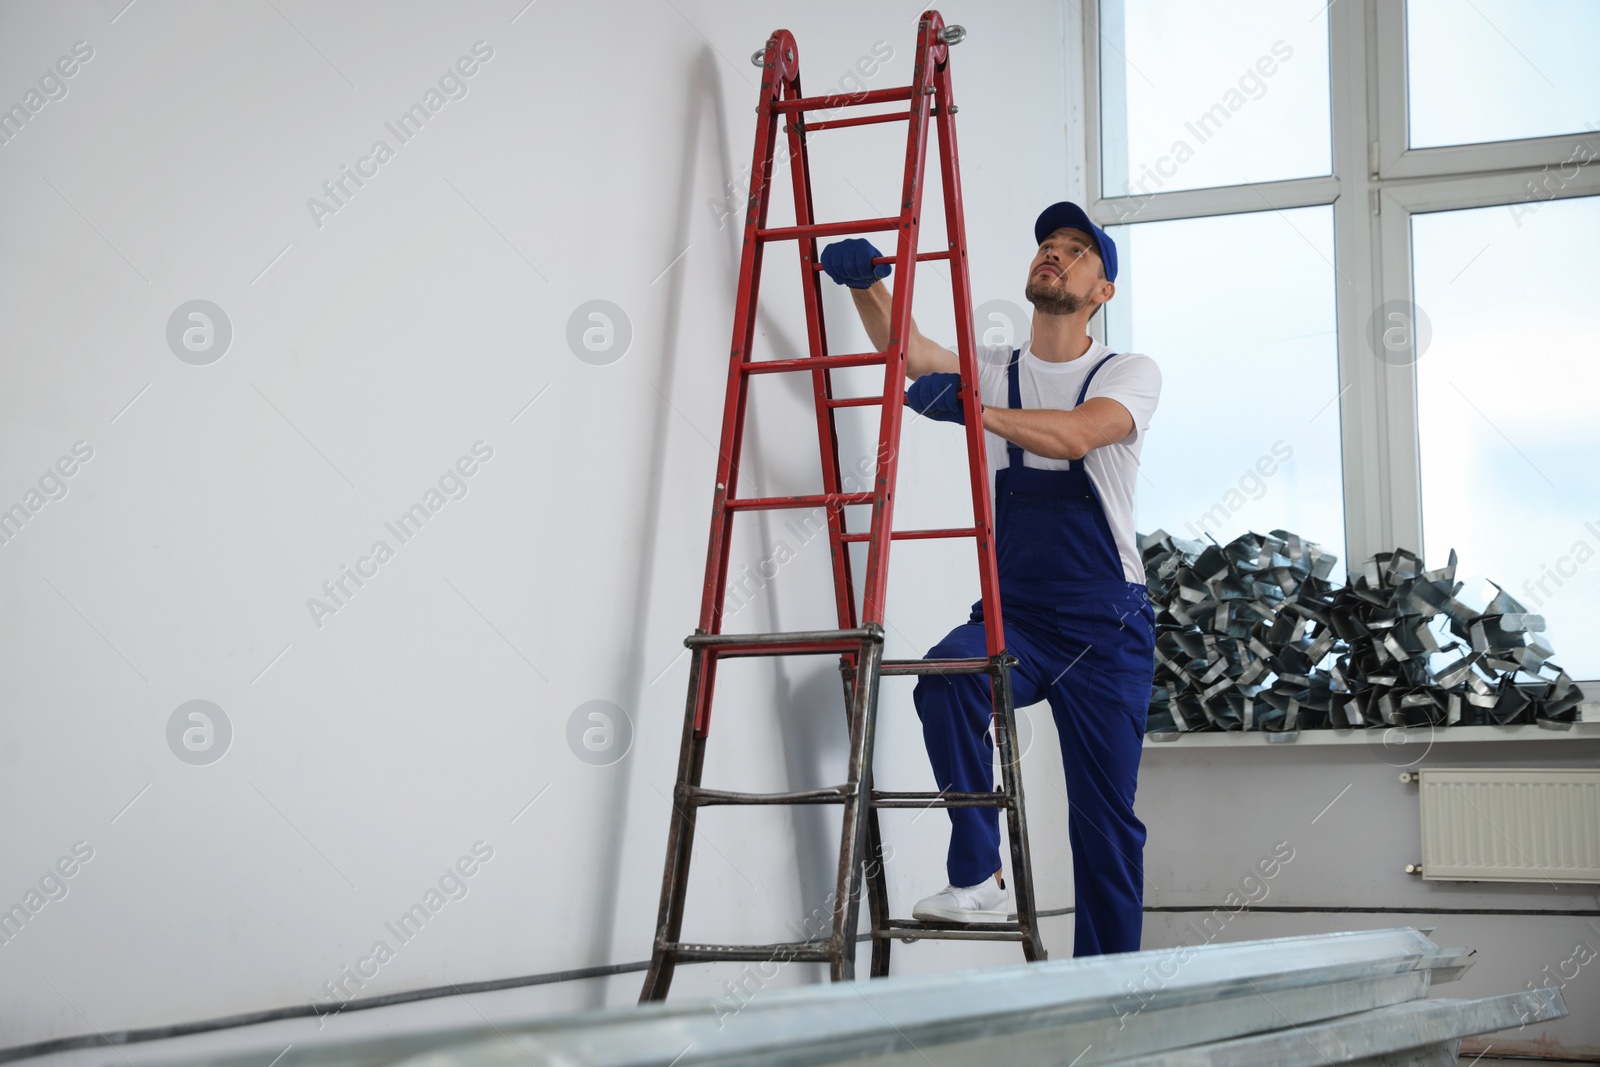 Photo of Construction worker climbing up stepladder in room prepared for renovation